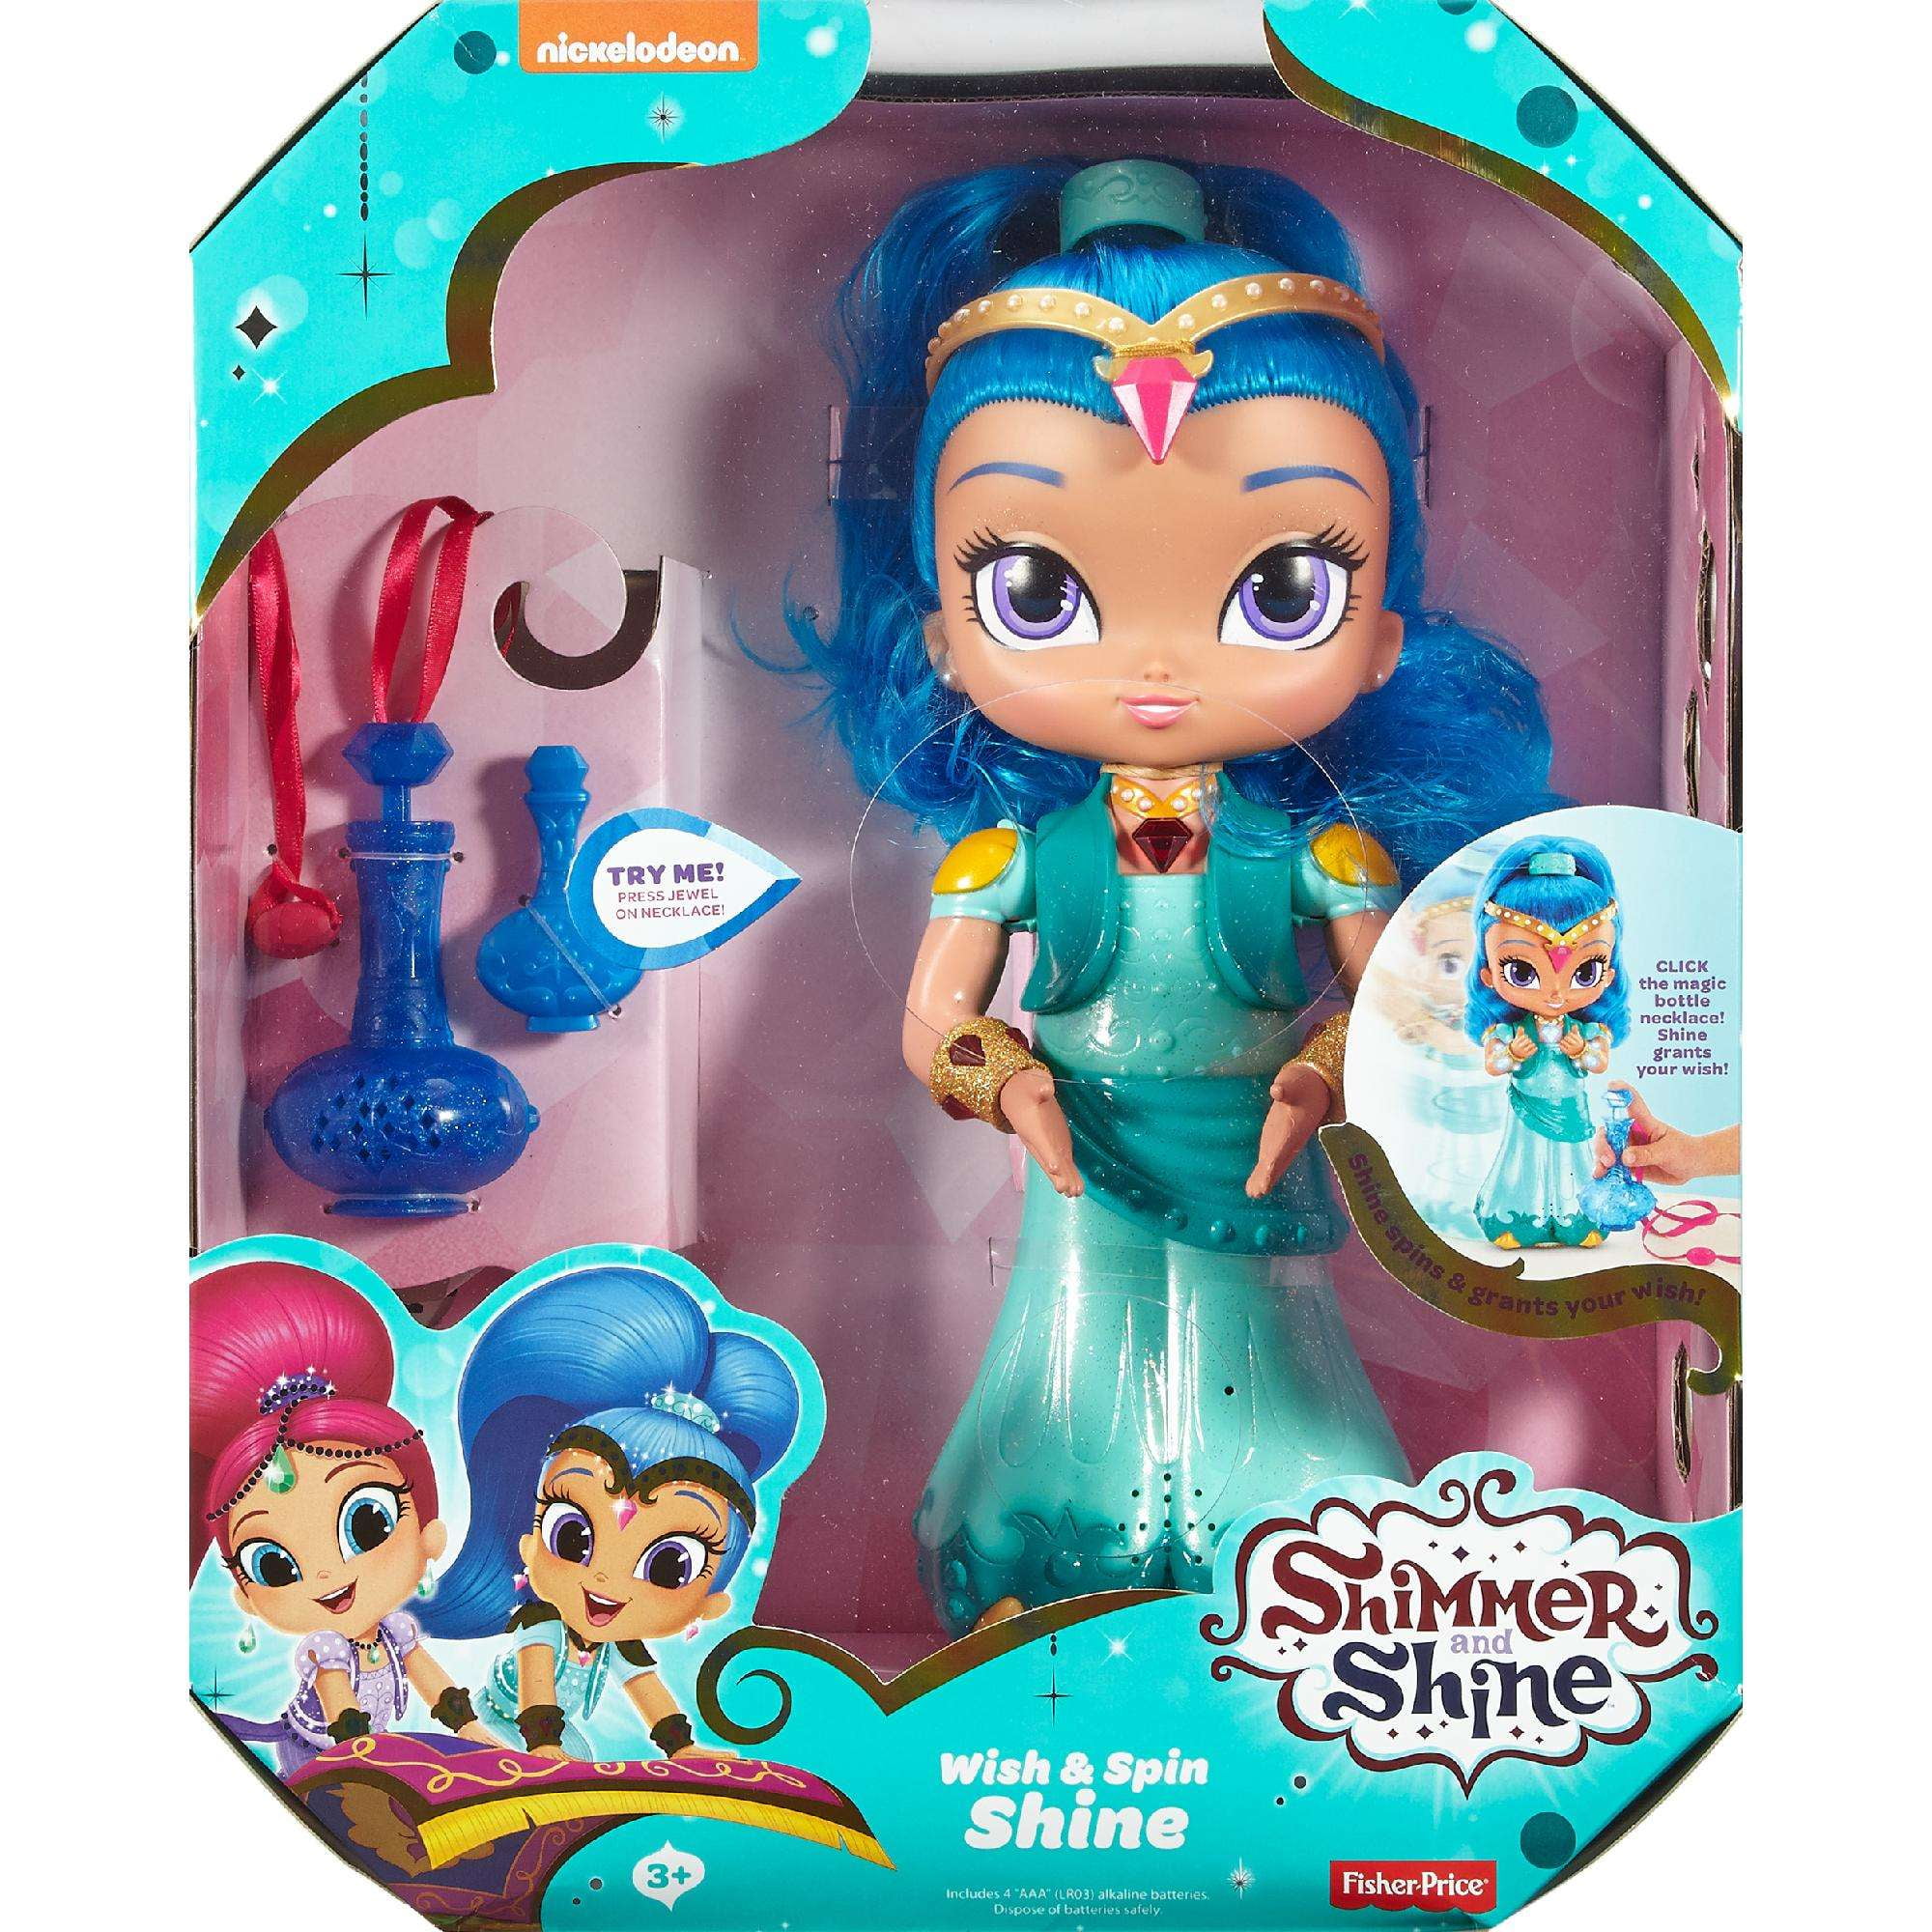 6" Dolls Brand New Nickelodeon BOTH Bedtime Shimmer And Shine 